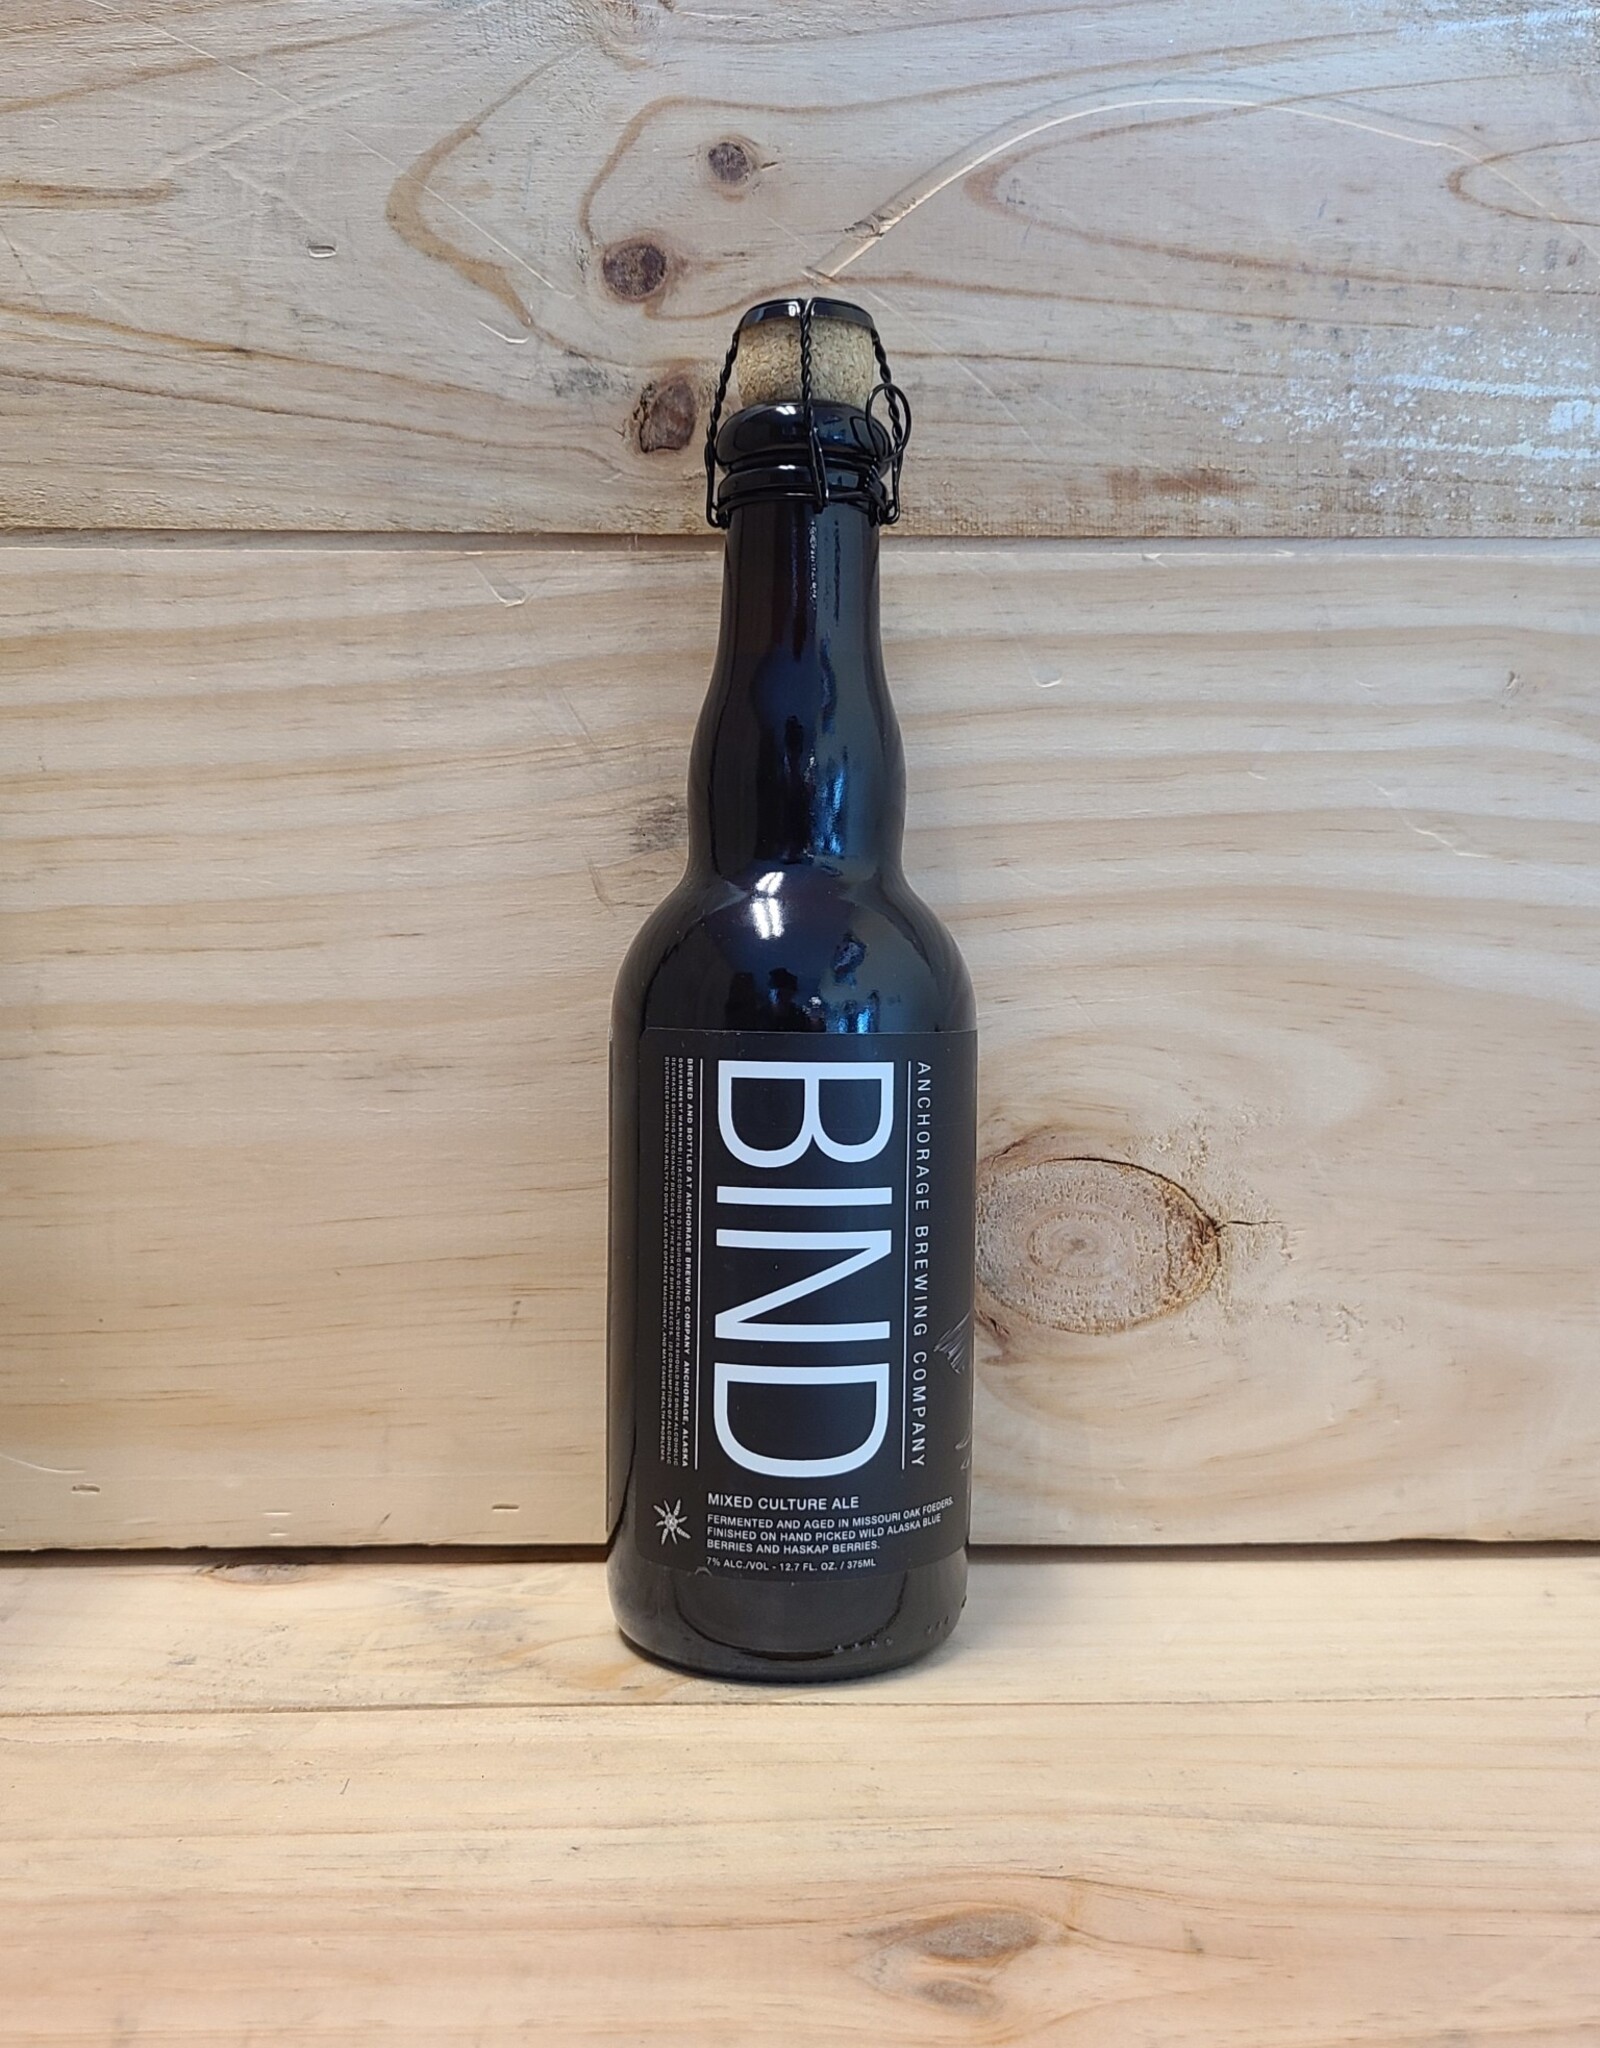 Anchorage Brewing Co. Bind Mixed Culture Ale